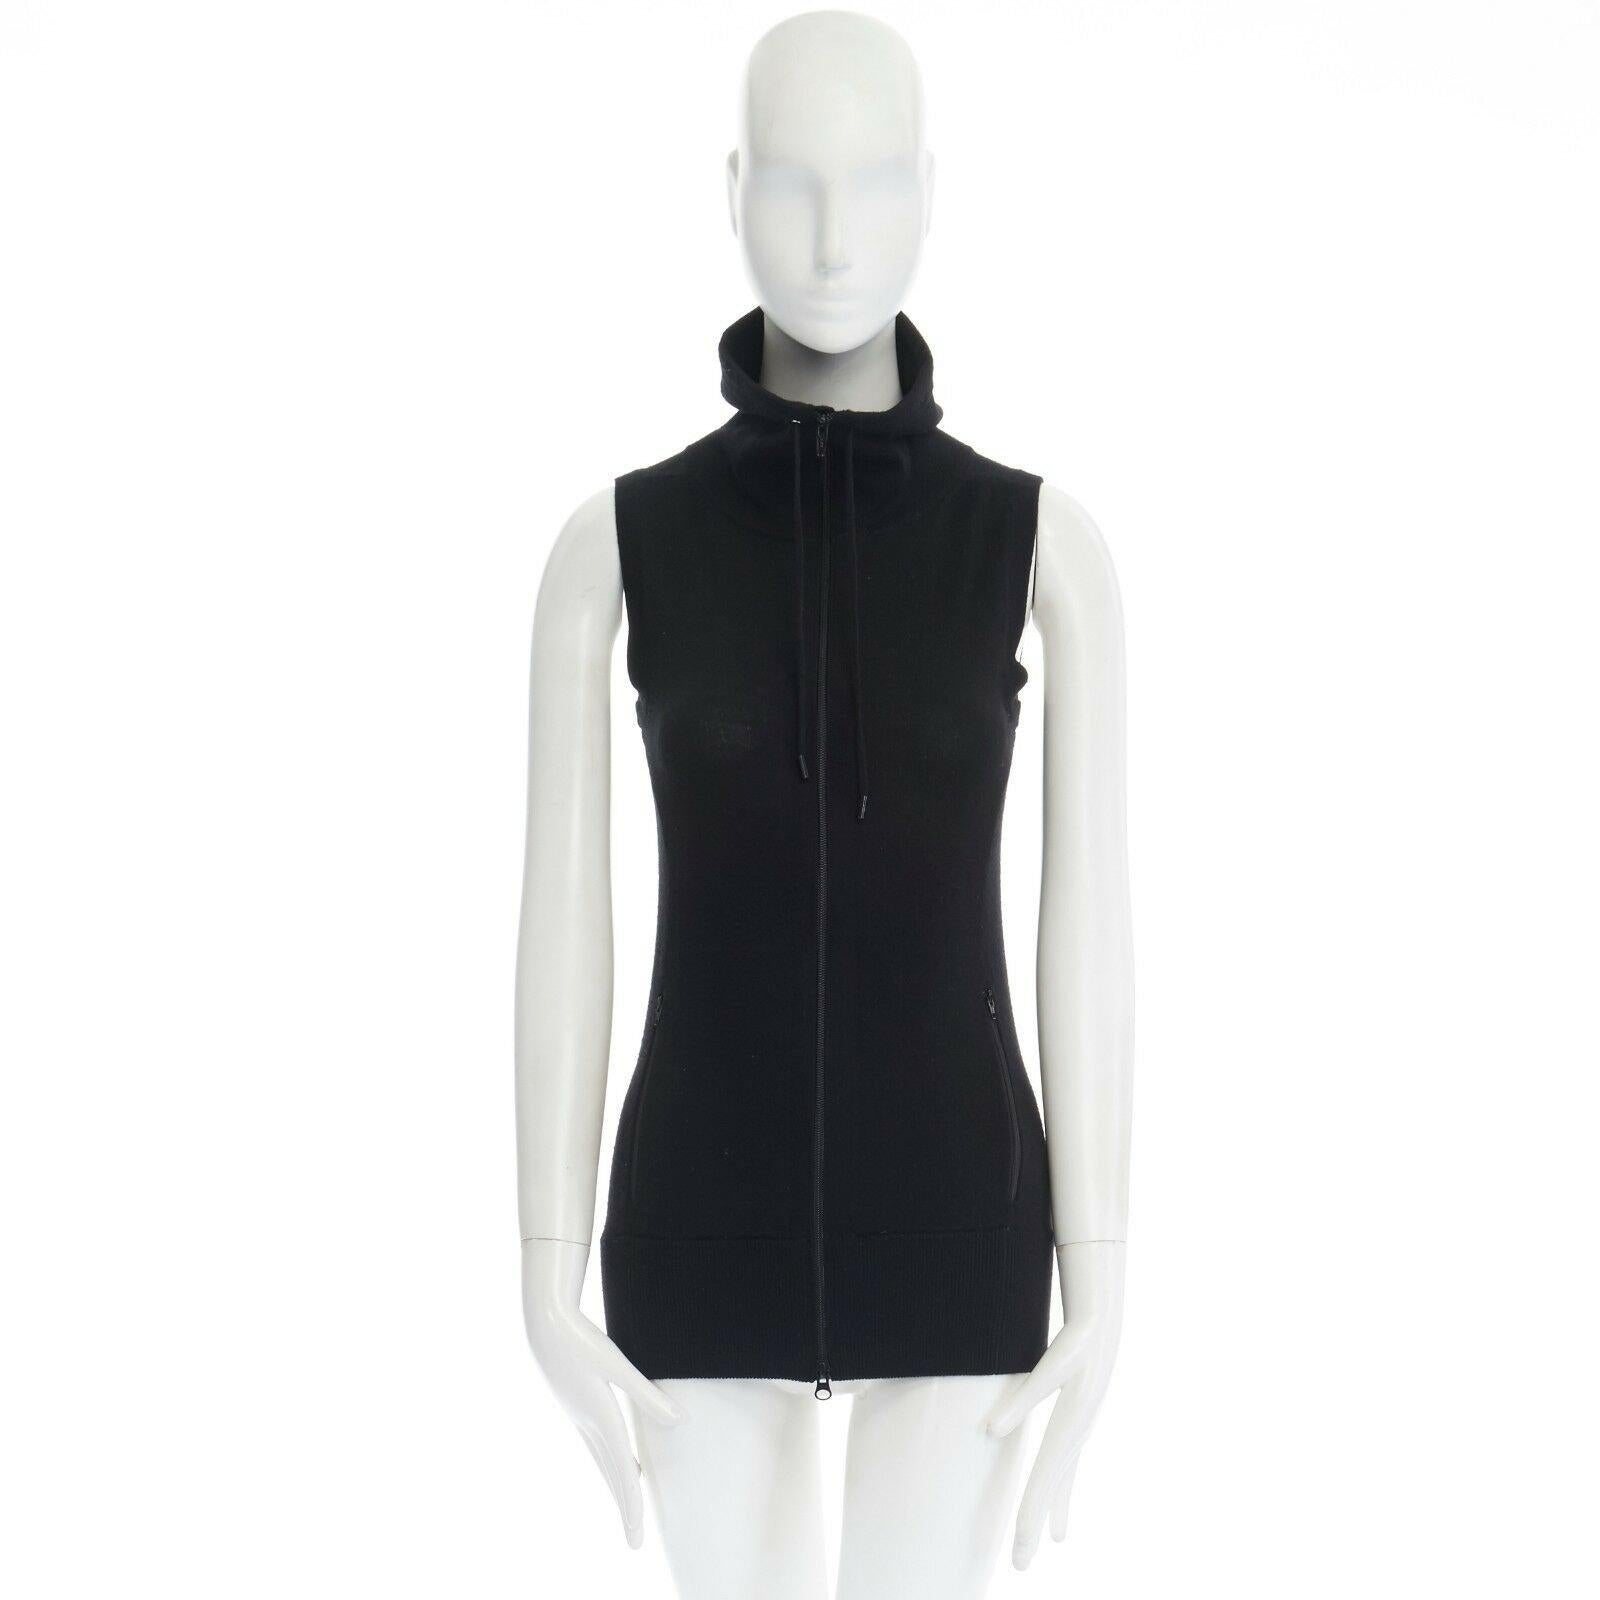 THEORY black wool blend high collar drawstring zip front sleeveless vest XS Reference: LNKO/A00720 Brand: Theory Material: Wool Color: Black Pattern: Solid Closure: Zip Extra Detail: Wool, acrylic. Black. High collar. Drawstring detail. Zip front